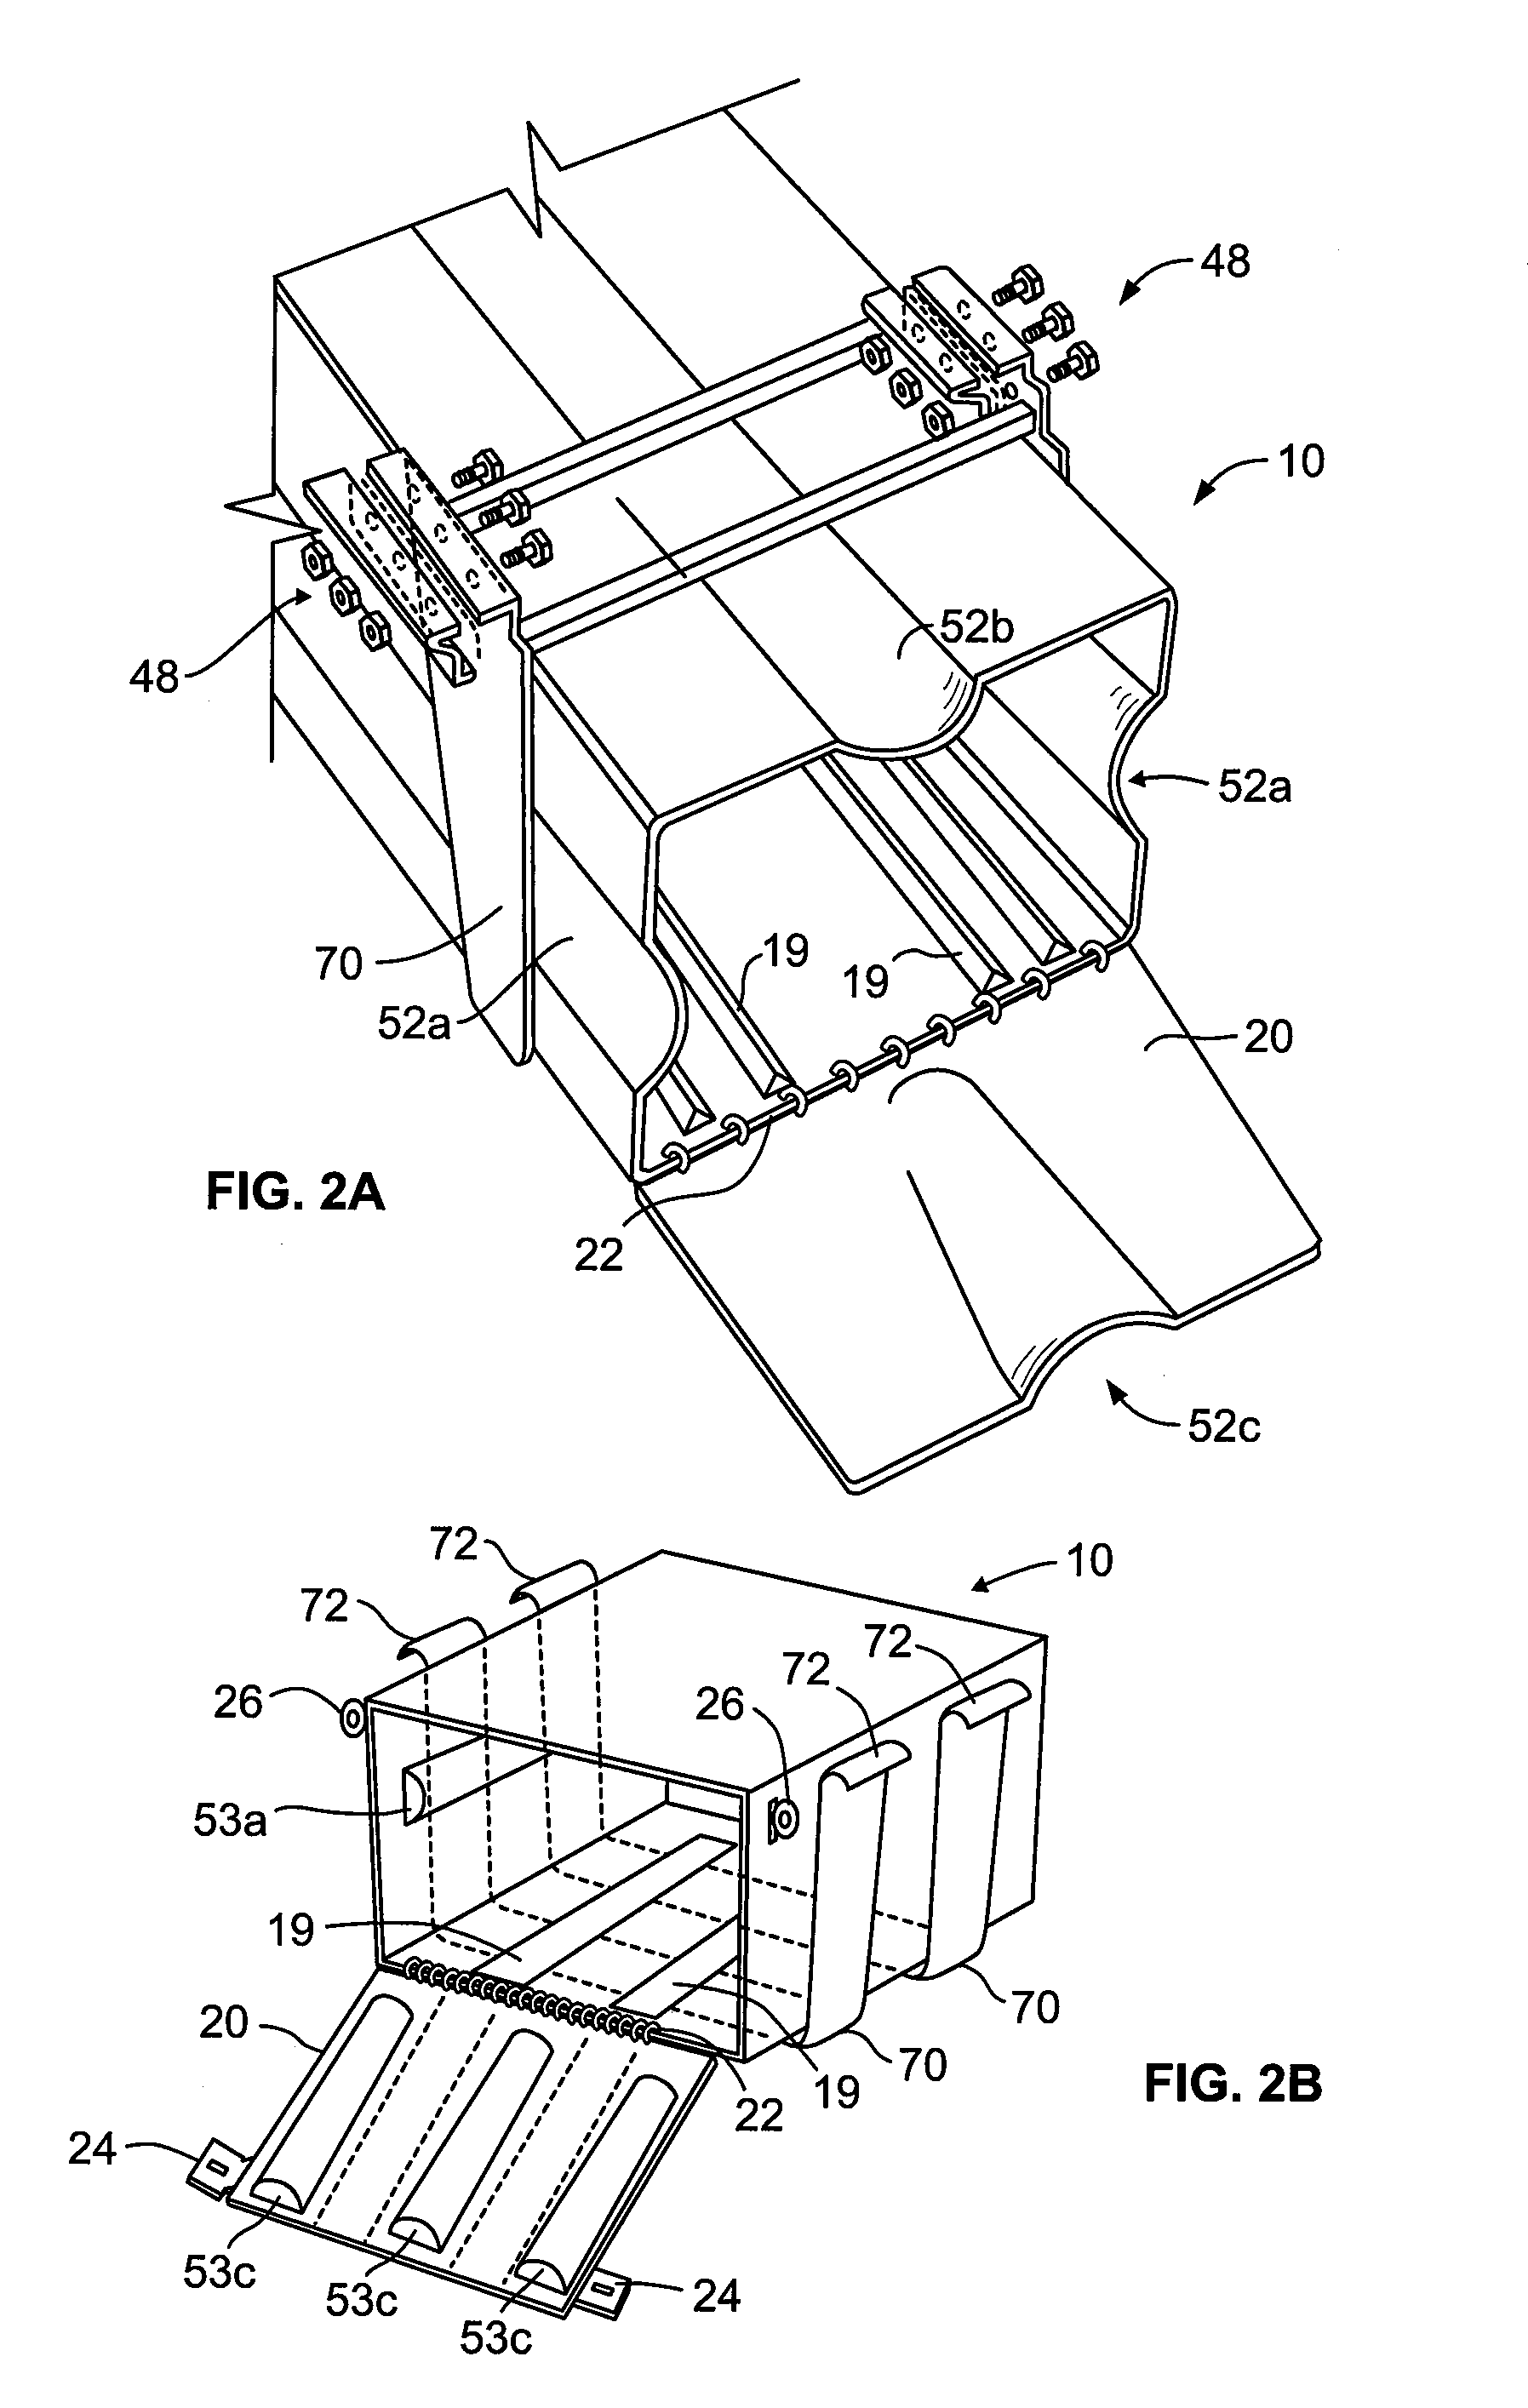 Underdeck carrier system for mobile containers for segregating product types in common shipment